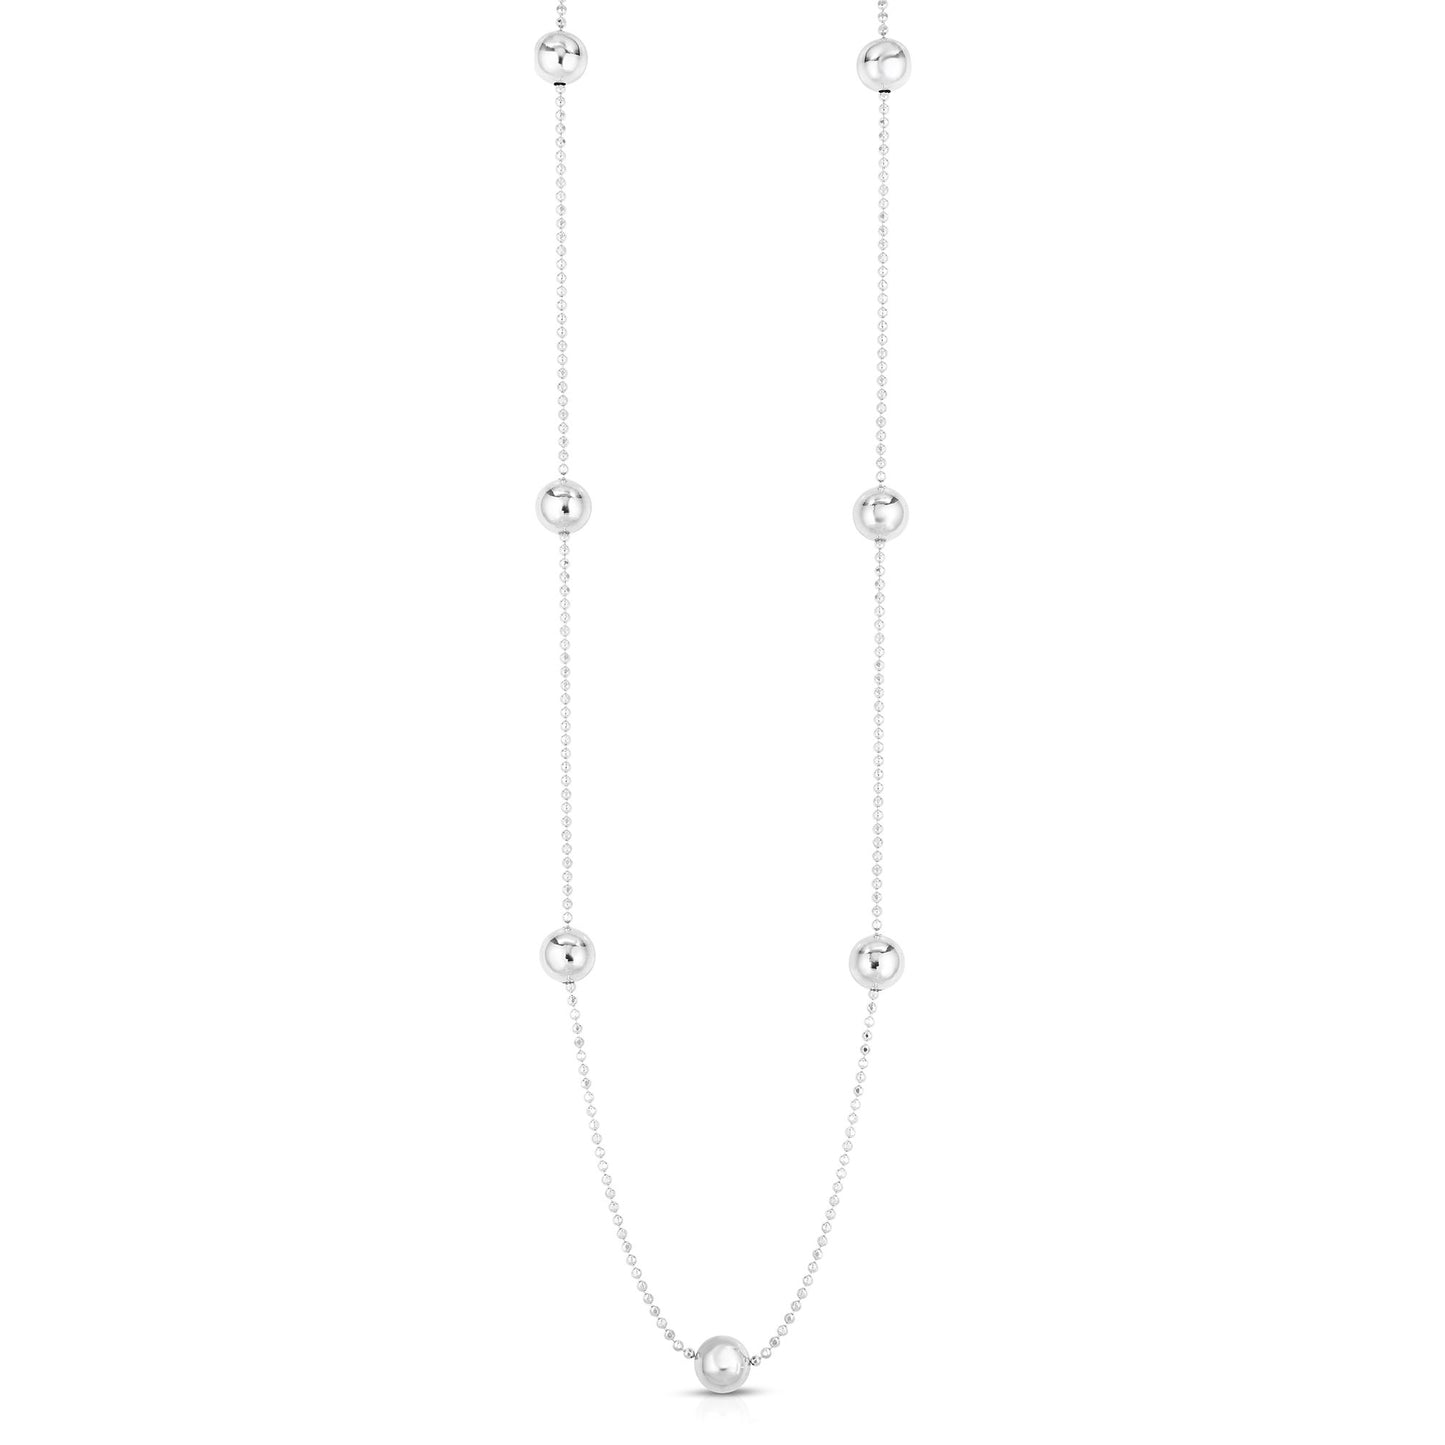 Silver Bead Station Necklace